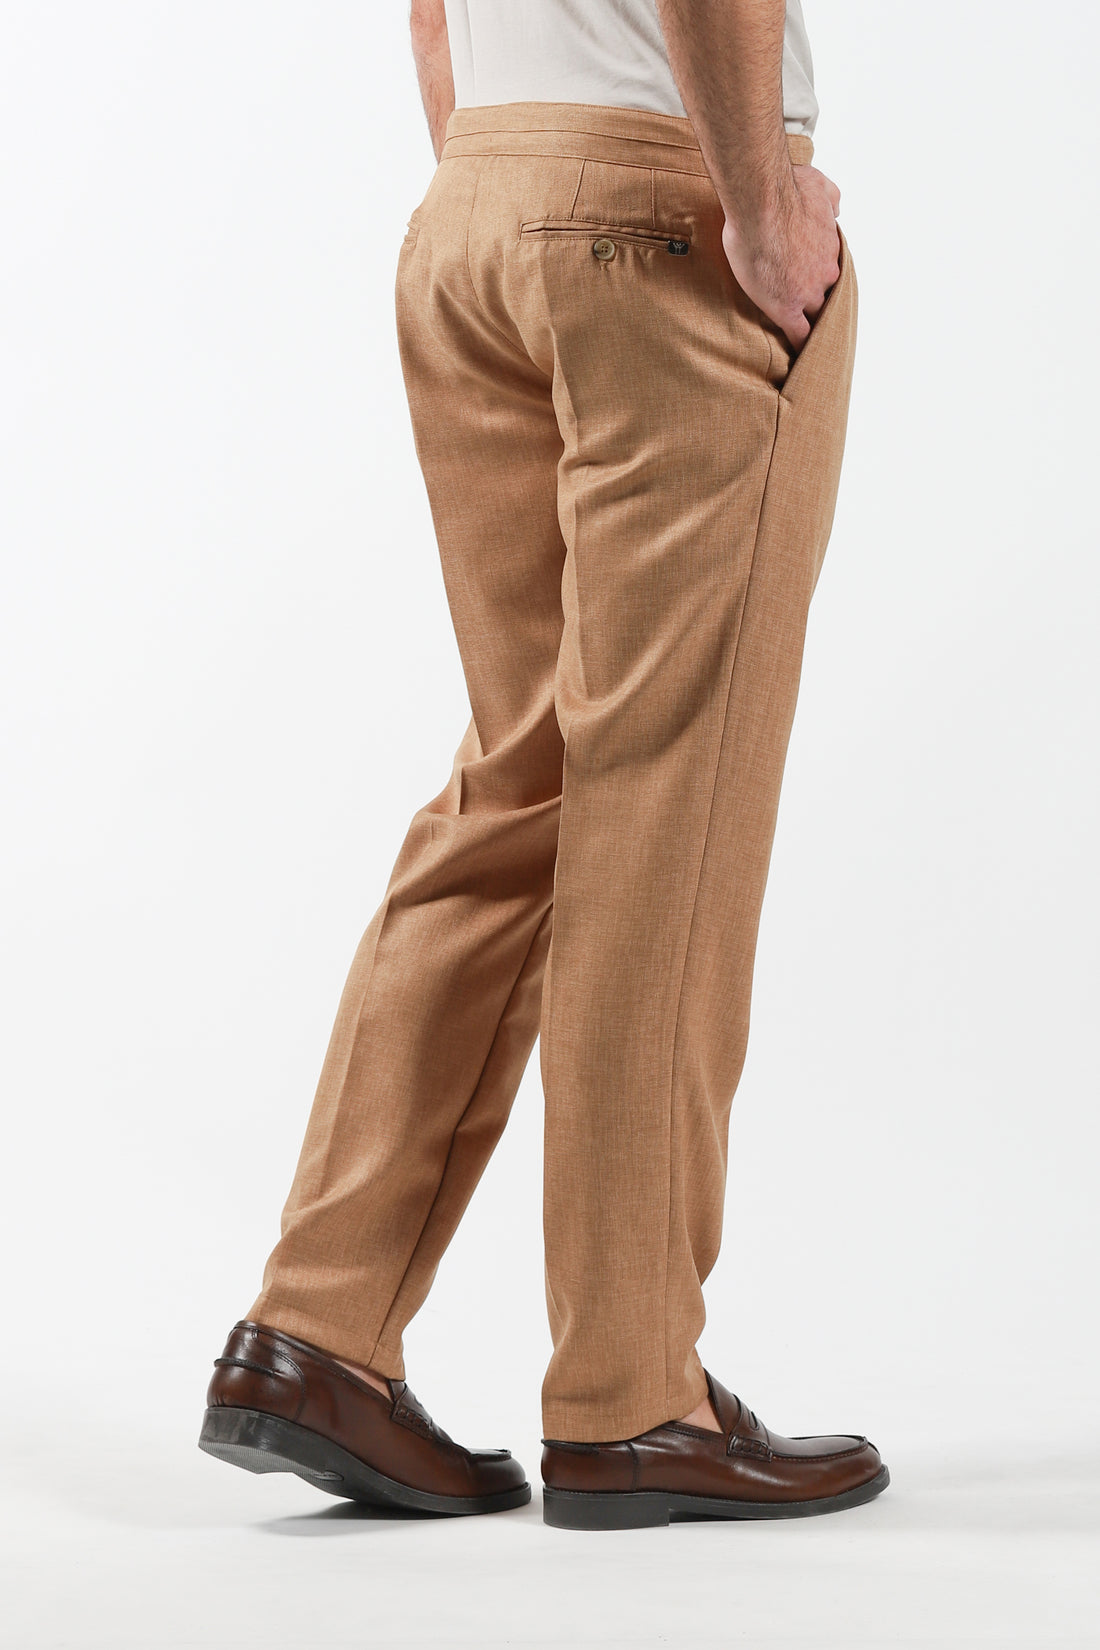 Trousers with lace in linen effect fabric - Tegola